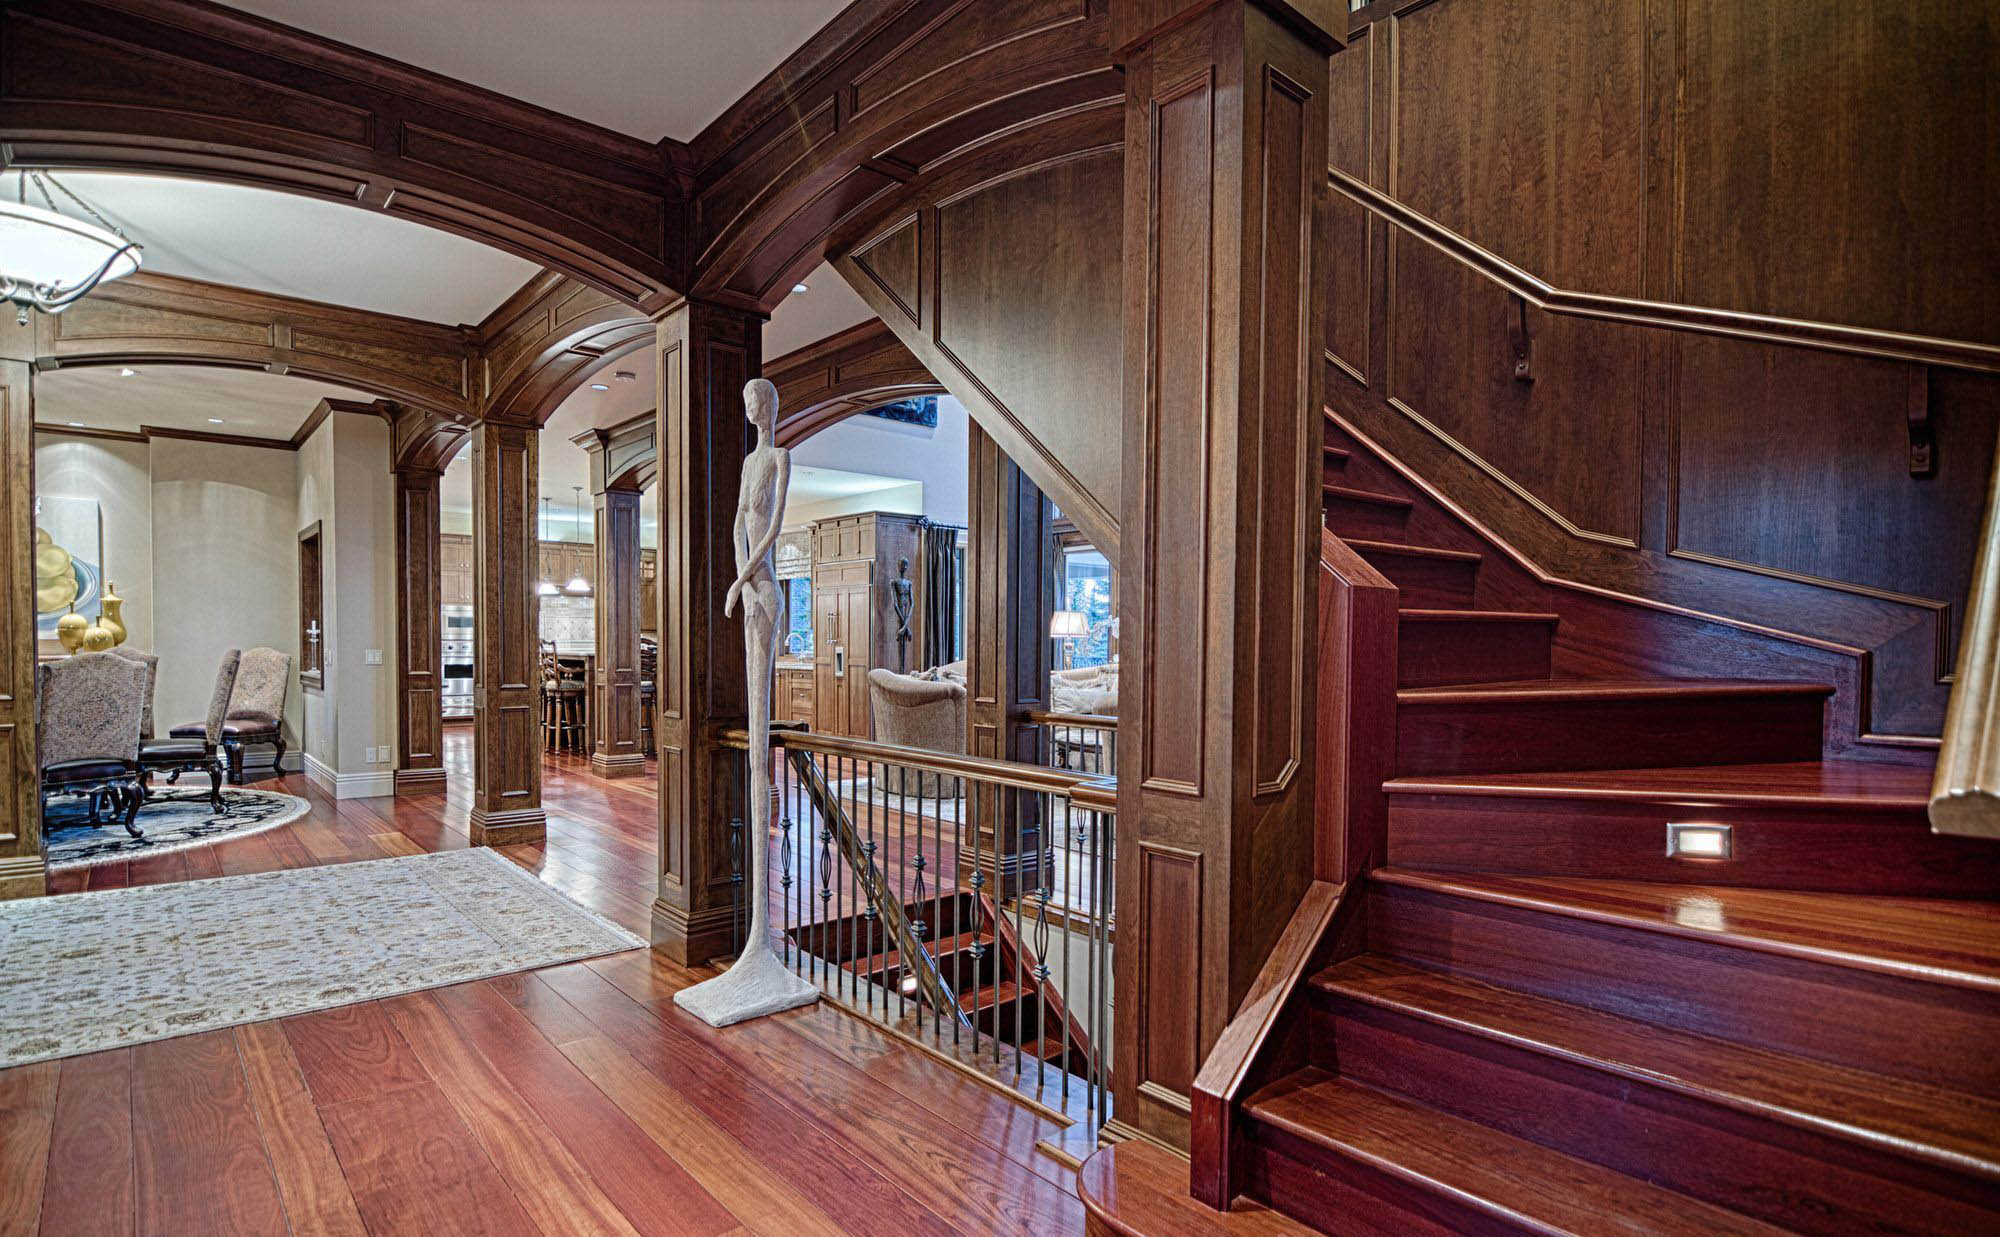 Rich real wood wall paneling with matching trim, stairs and columns.